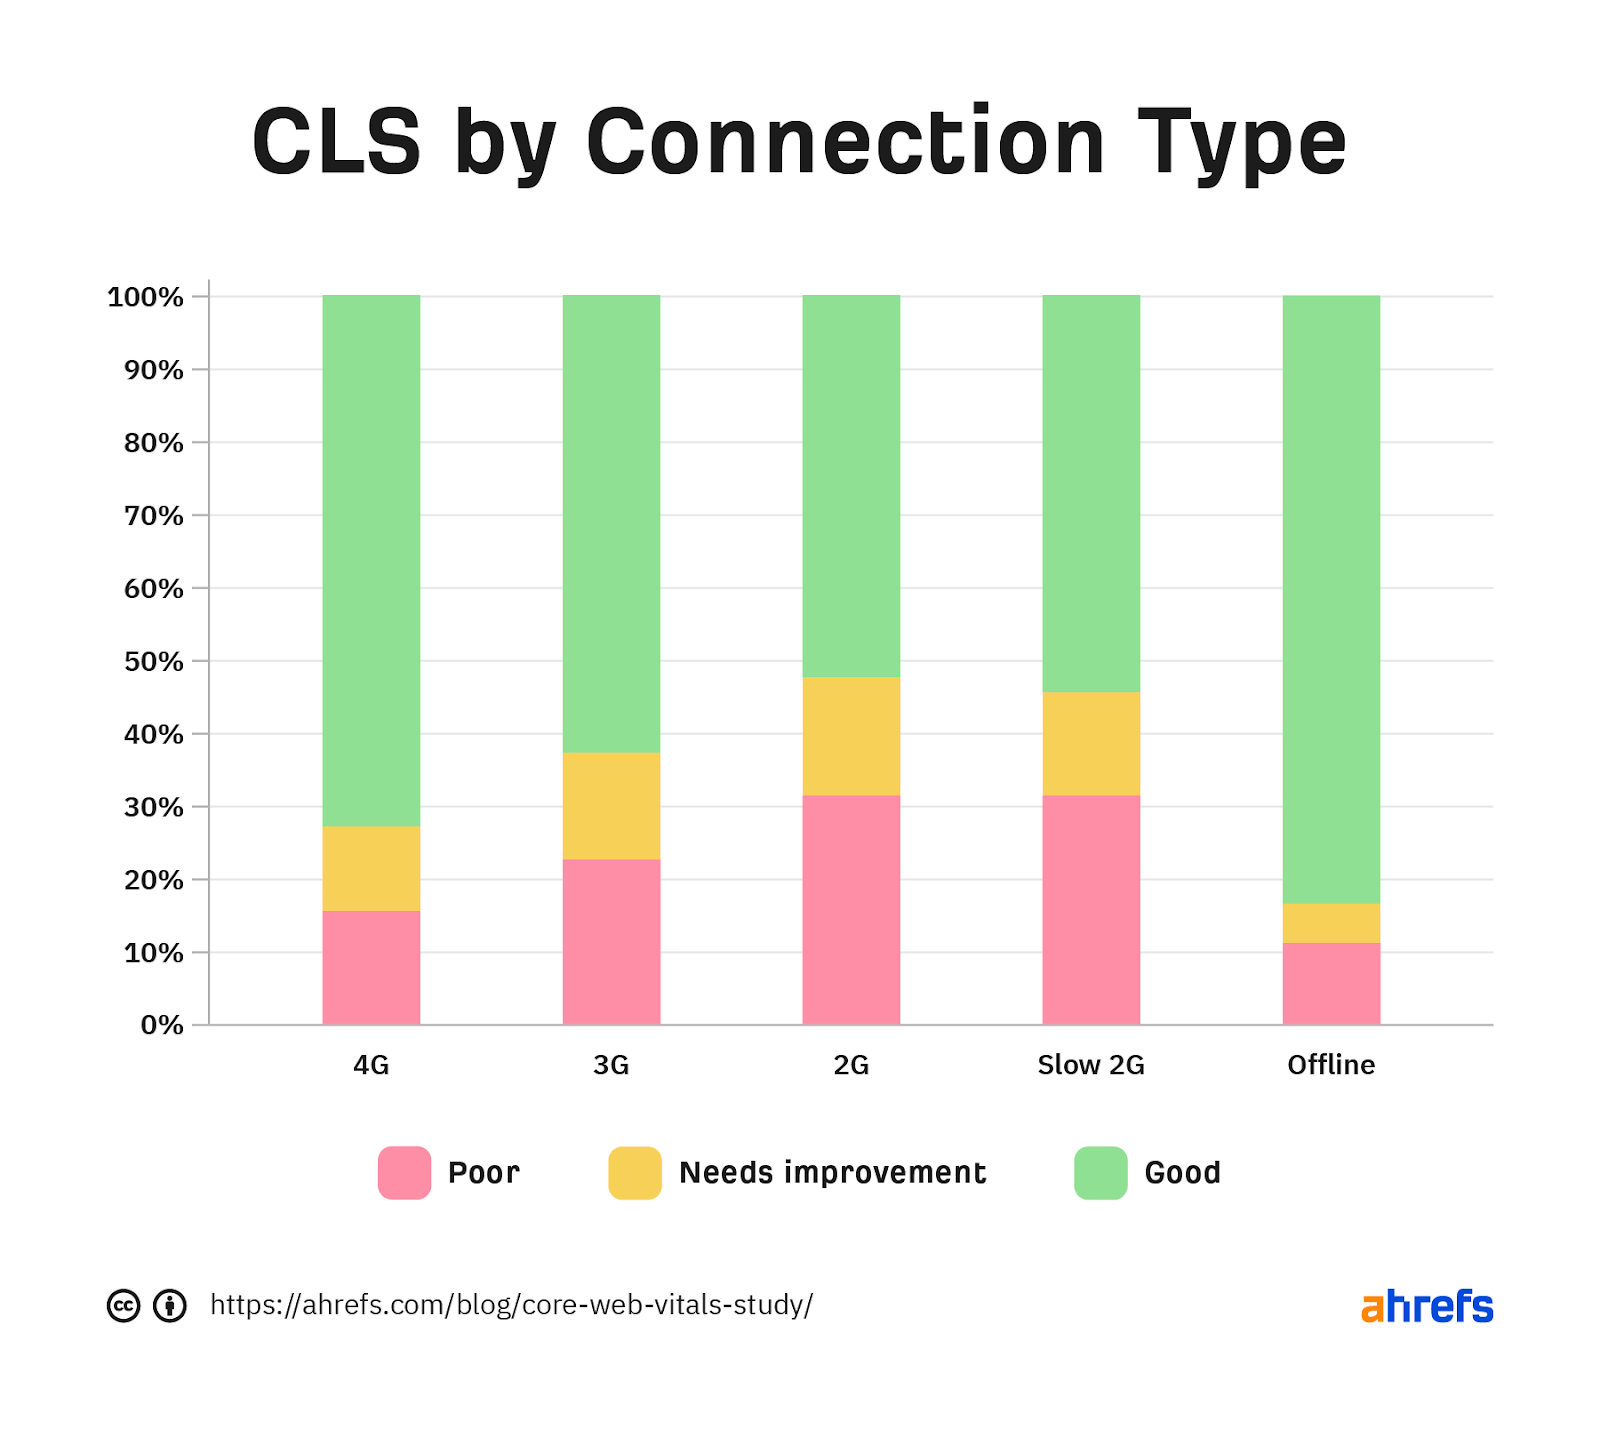 Graph showing the breakdown of CLS by connection type